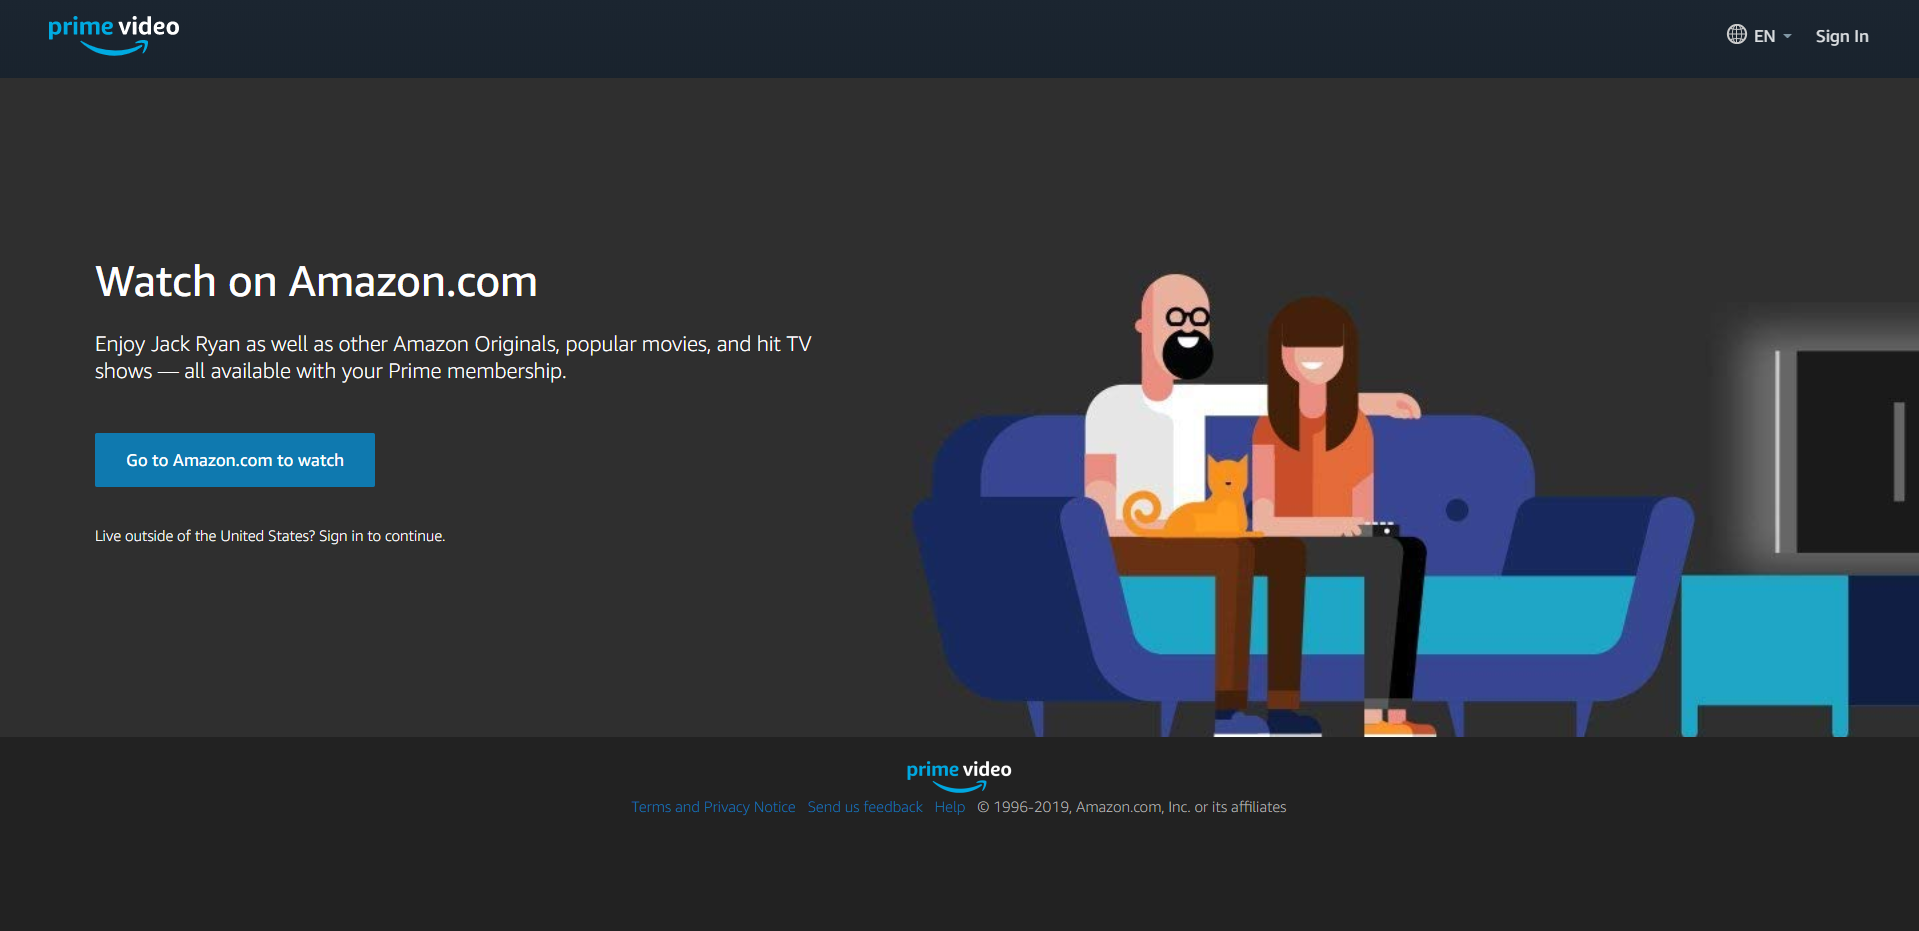 A screenshot of the Prime Video home page